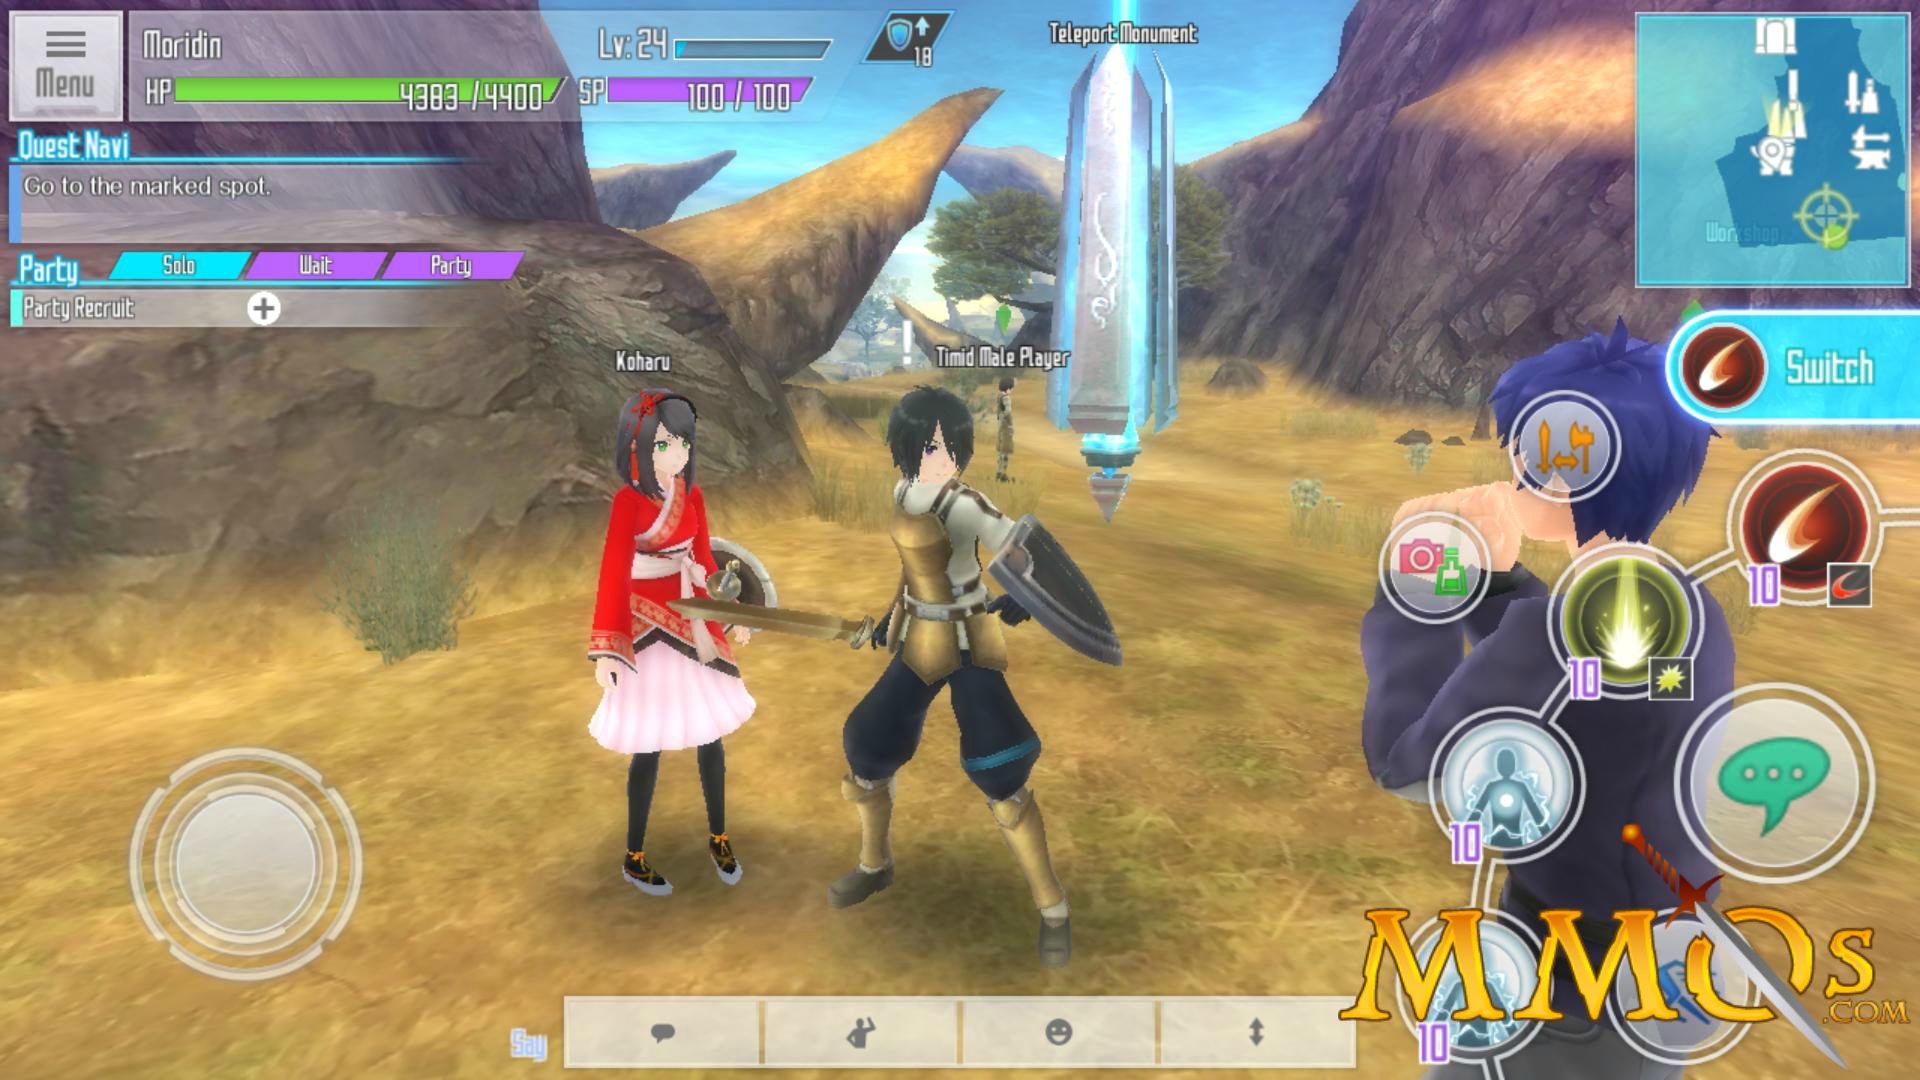 Sword Art Online: Integral Factor Now Available on Windows PC via Steam